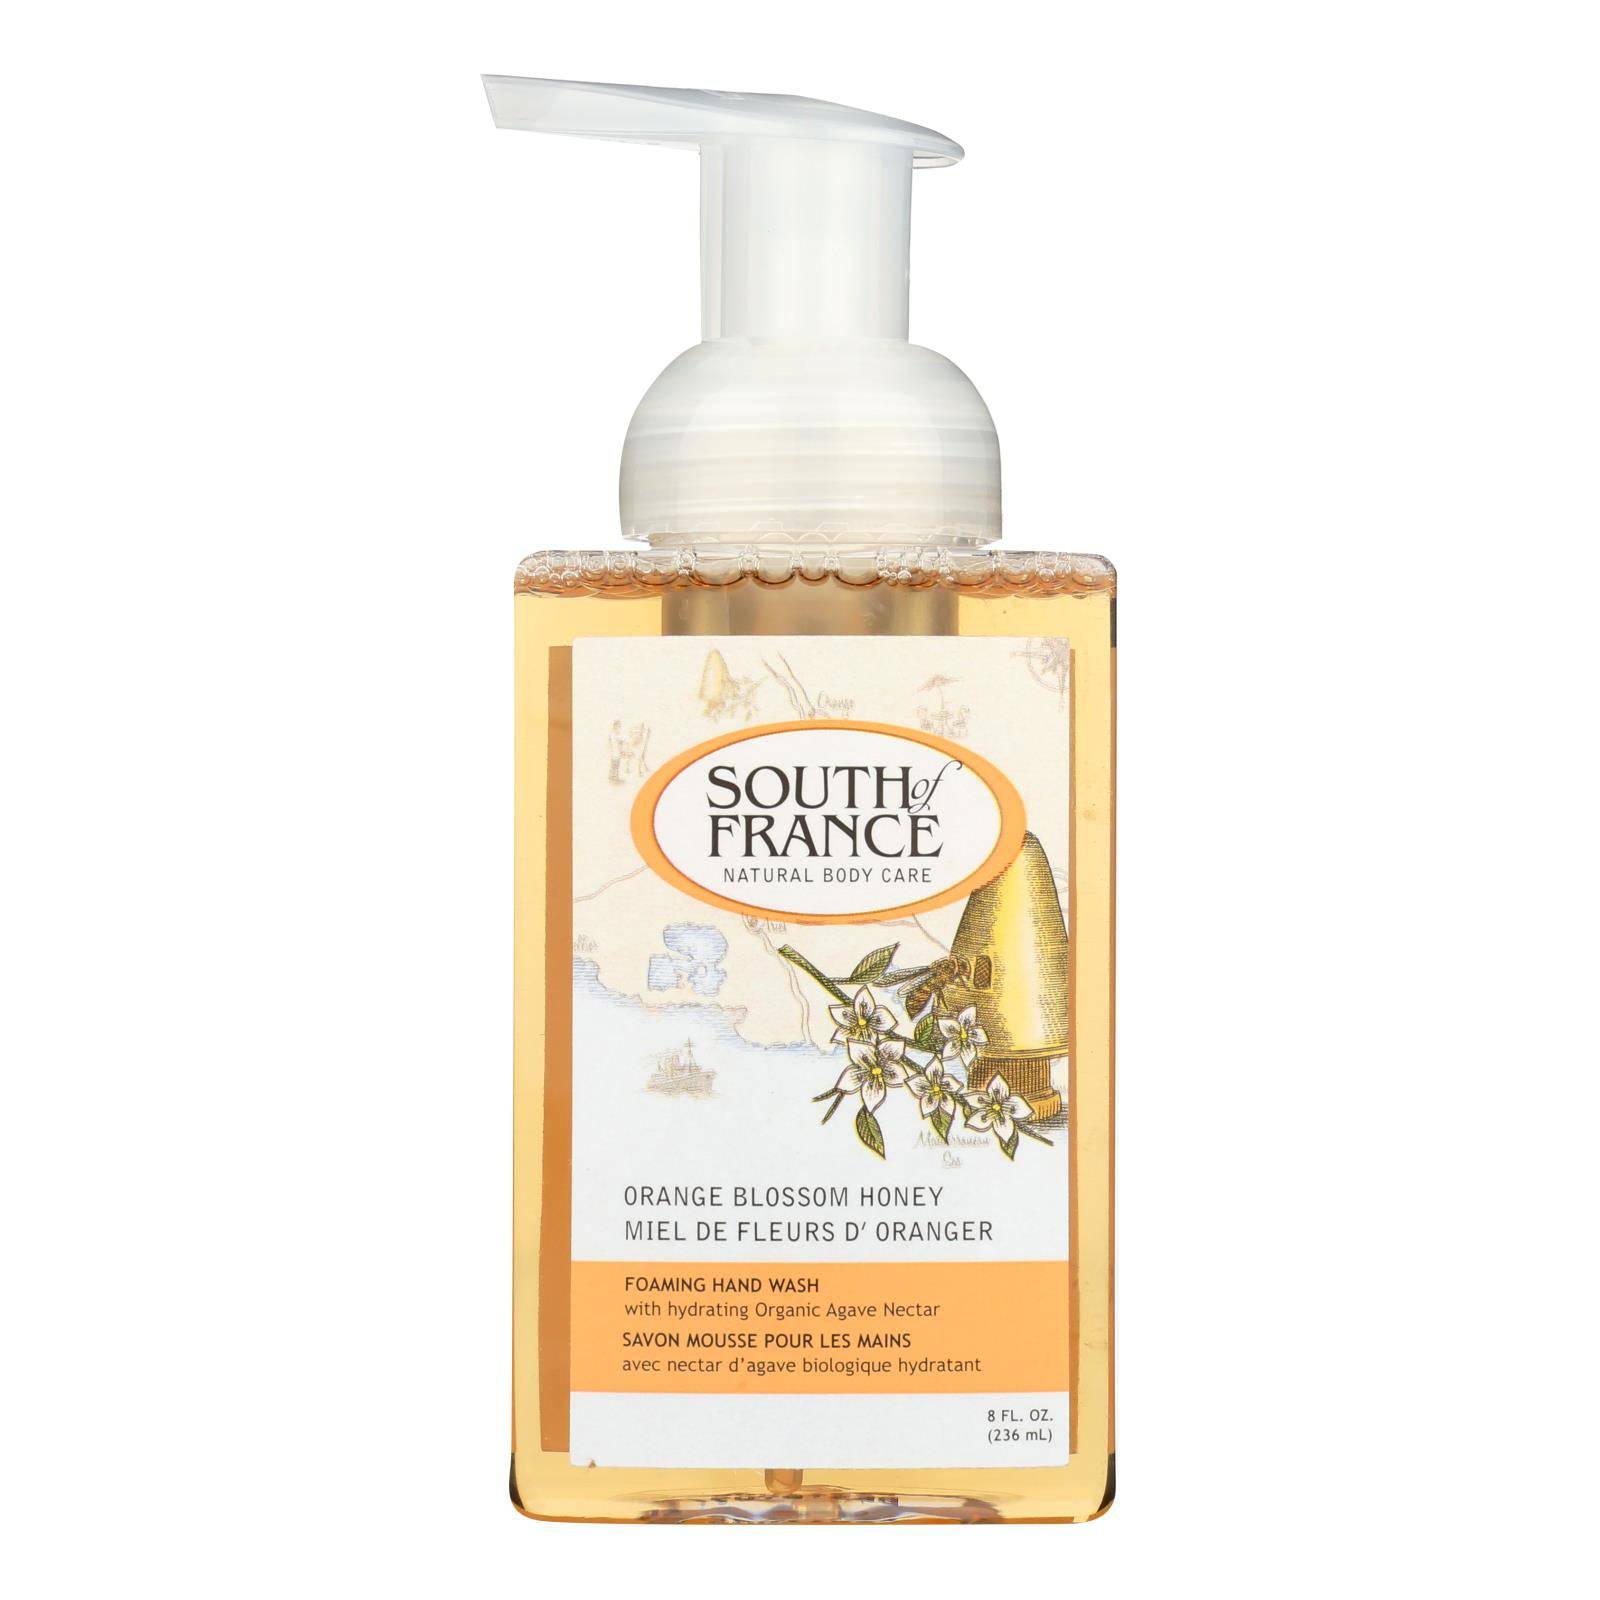 South Of France Hand Soap - Foaming - Orange Blossom Honey - 8 Oz - 1 Each | OnlyNaturals.us